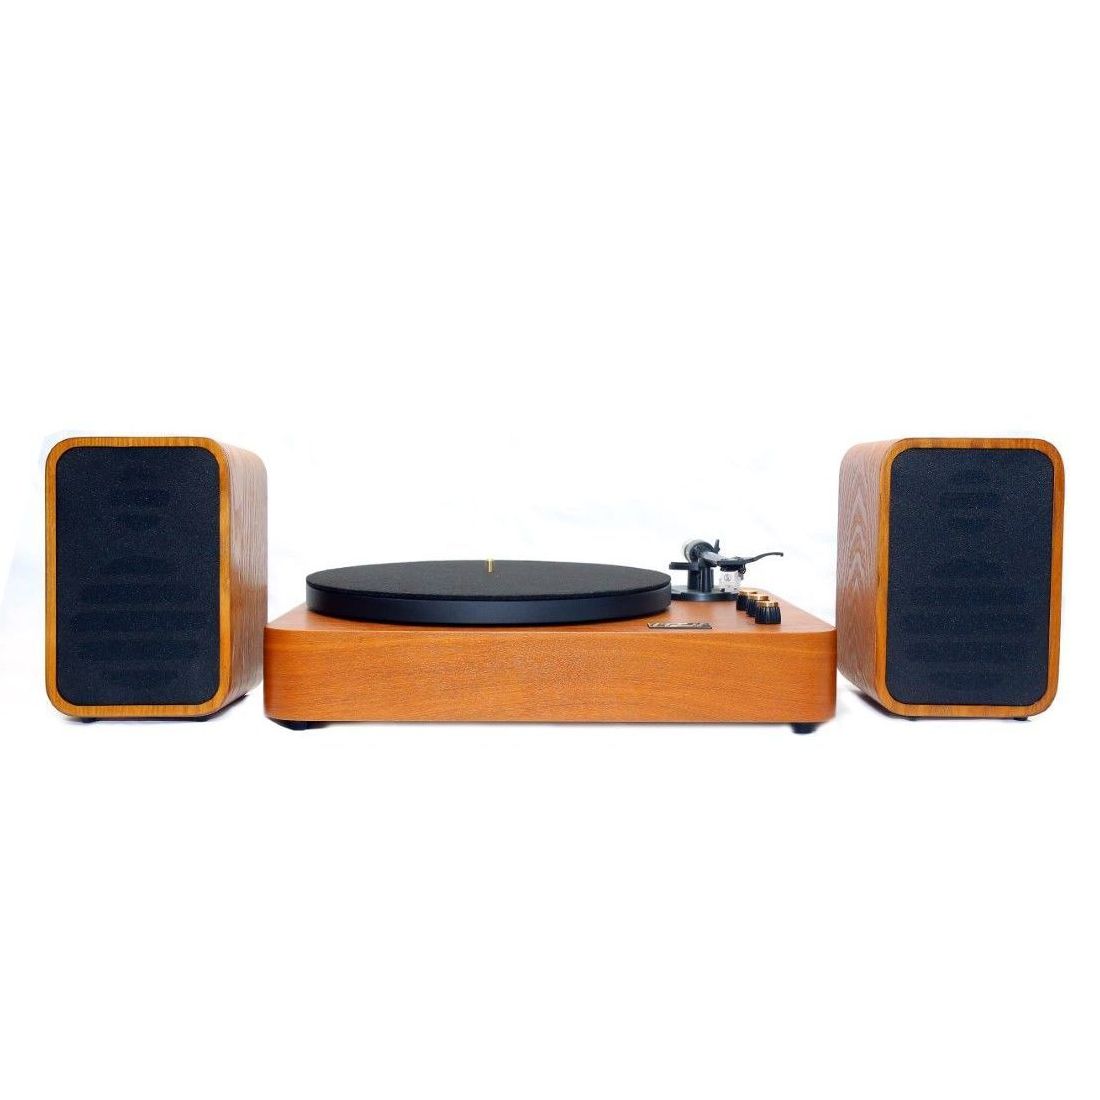 MJI MM2012 Turntable with Speakers - Natural Finish